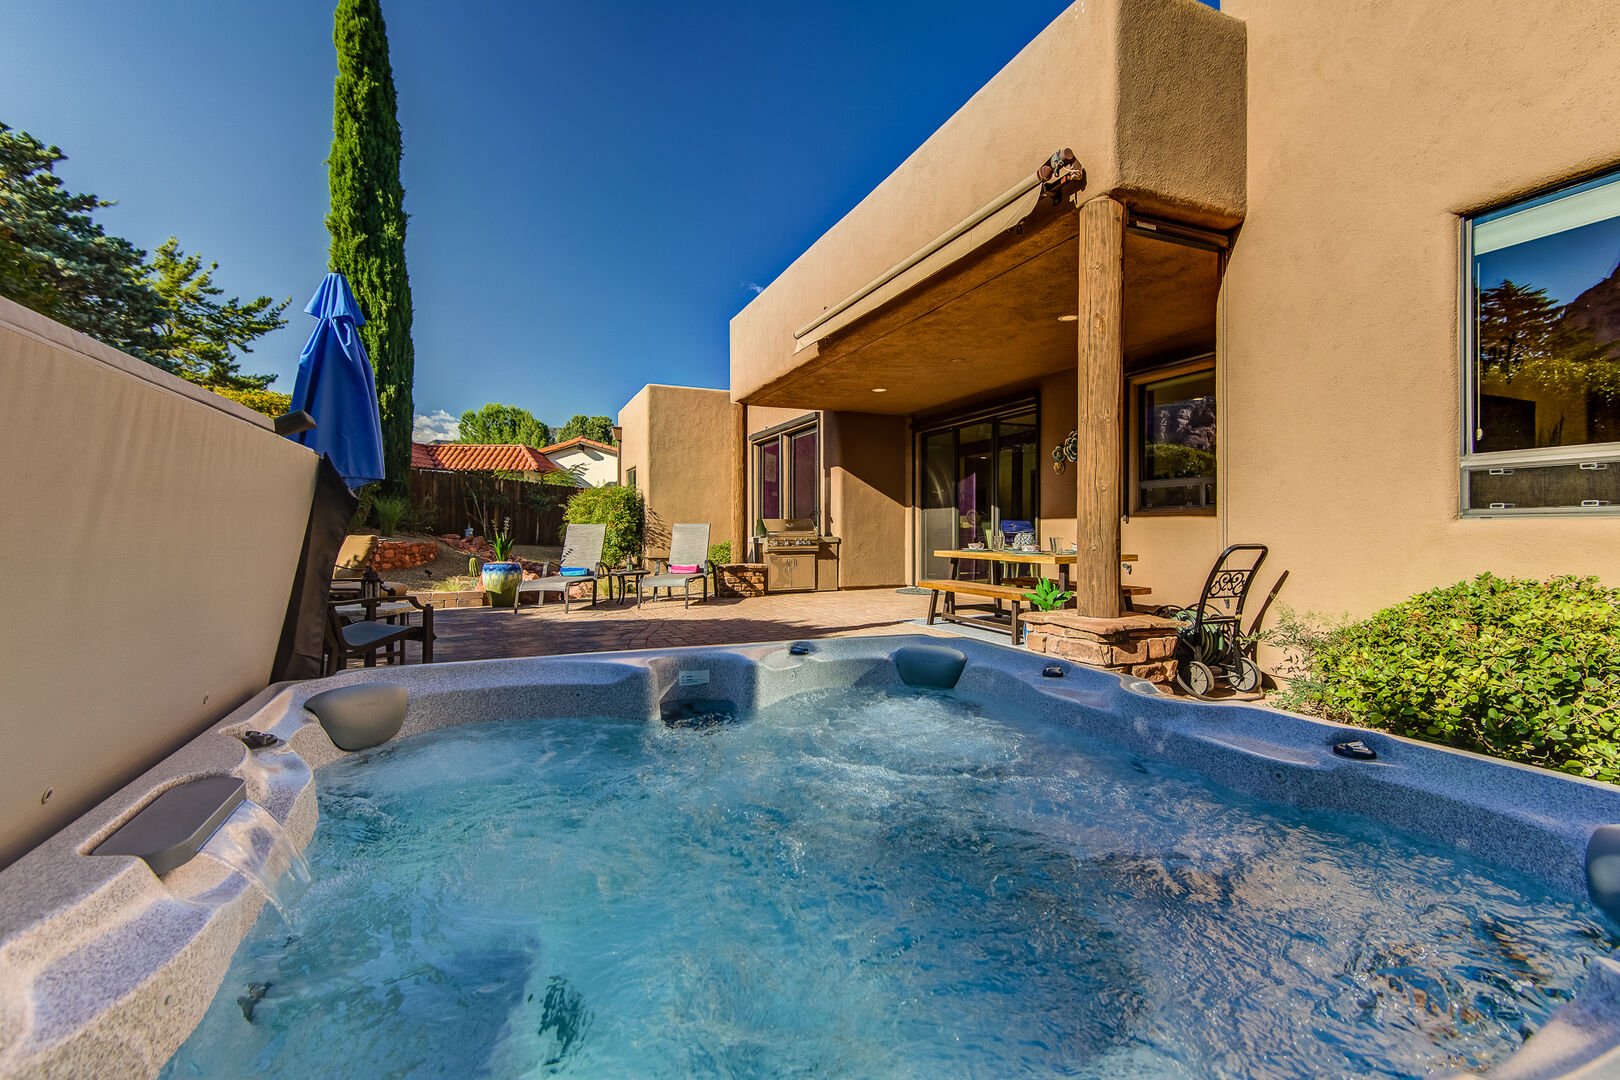 Large Private Yard with a Soothing Hot Tub